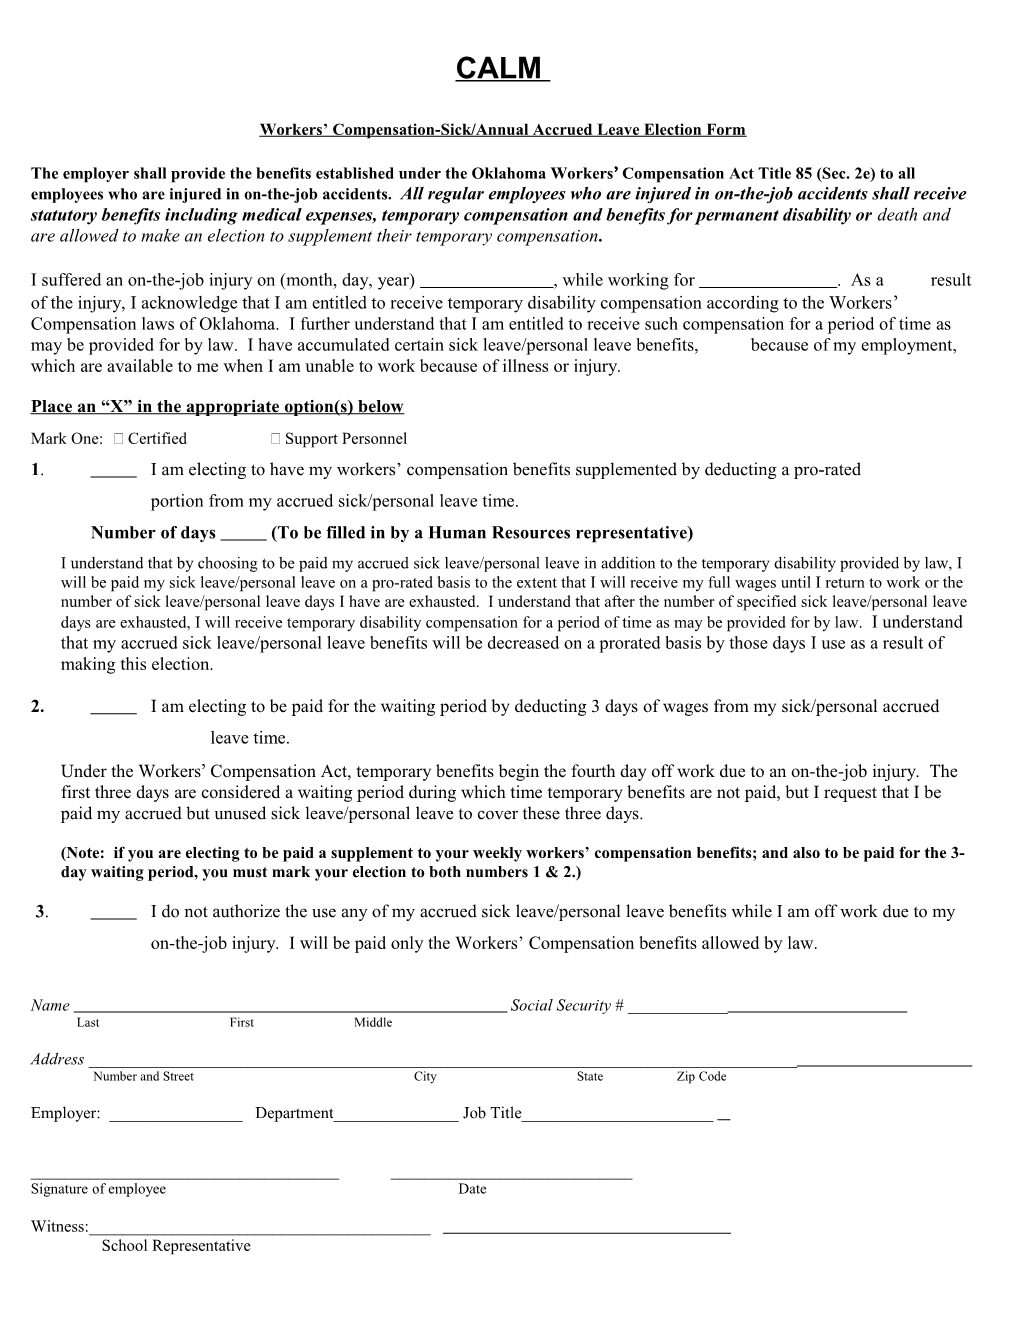 Workers Compensation-Sick/Annual Accrued Leave Election Form